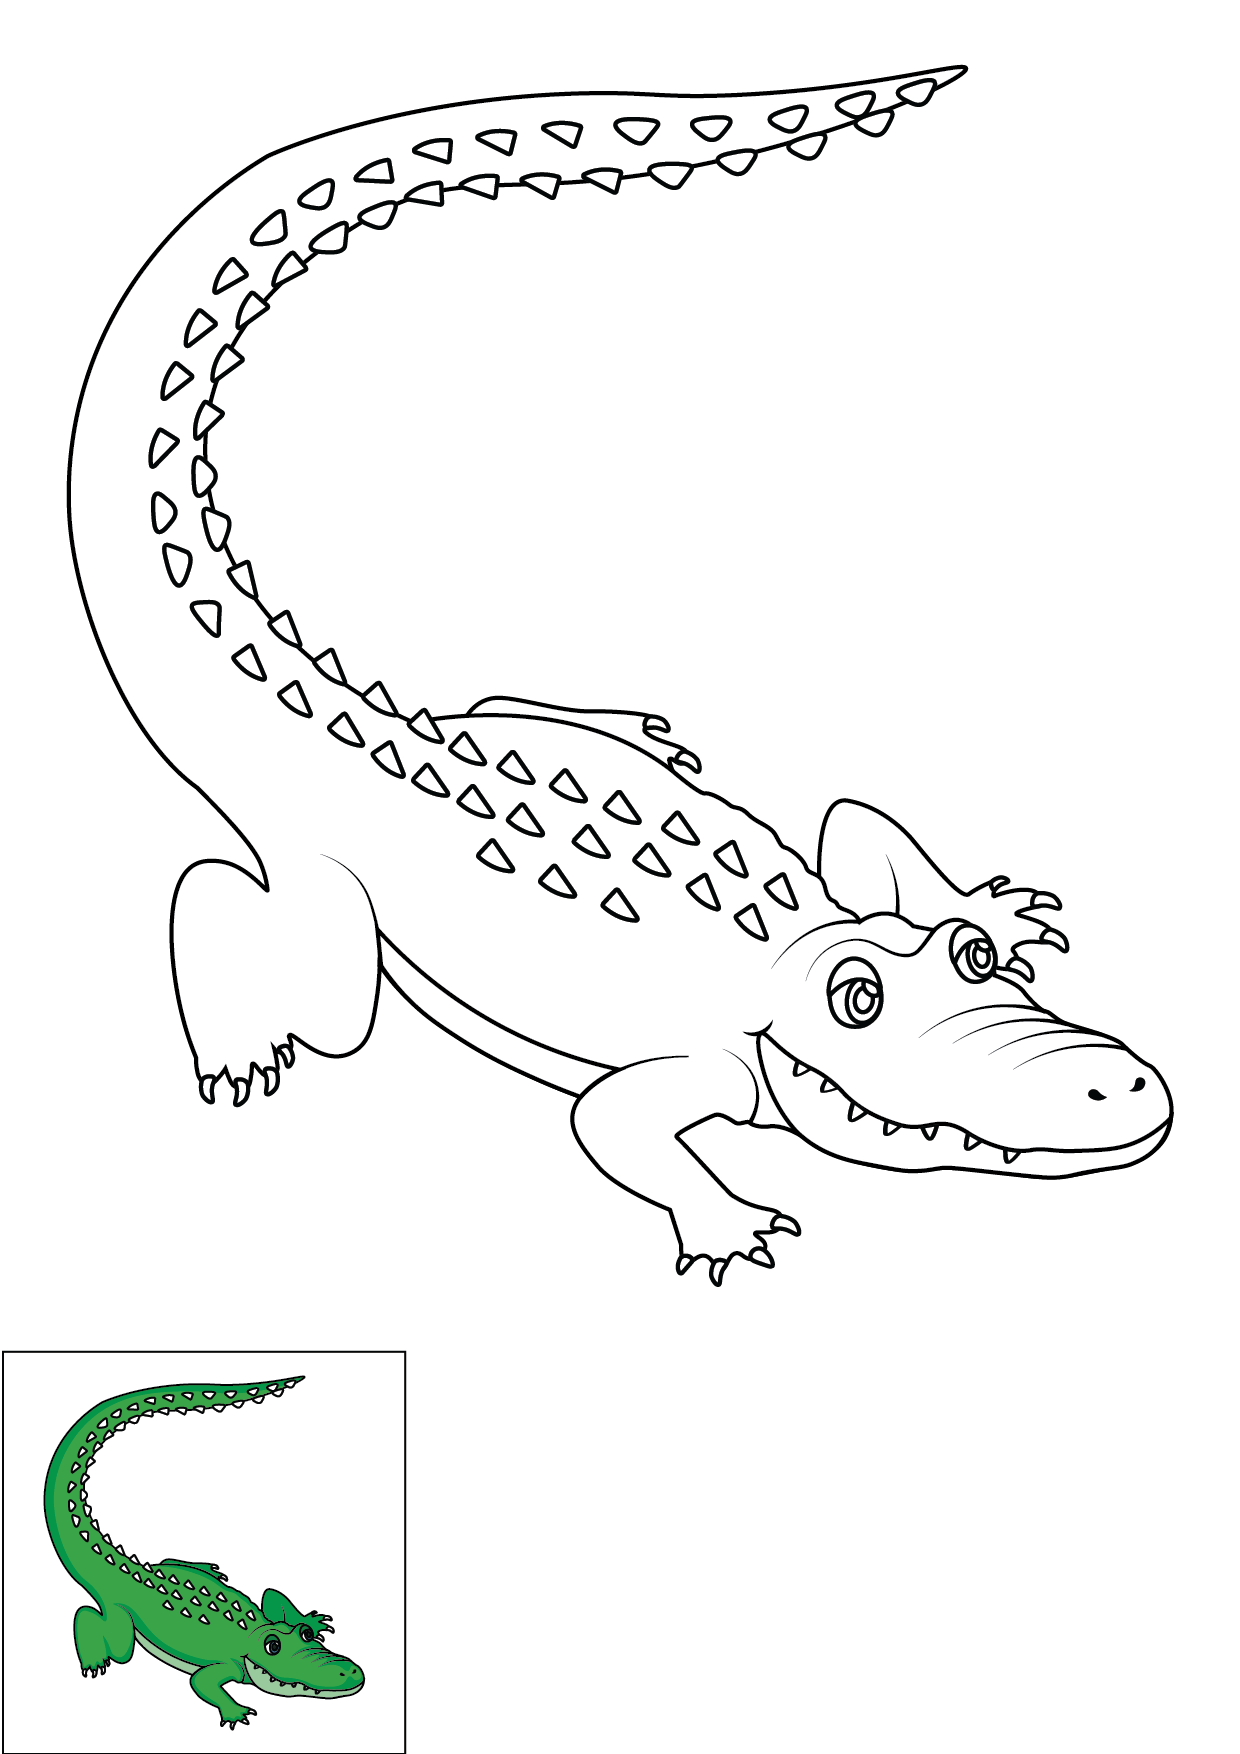 How to Draw An Alligator Step by Step Printable Dotted